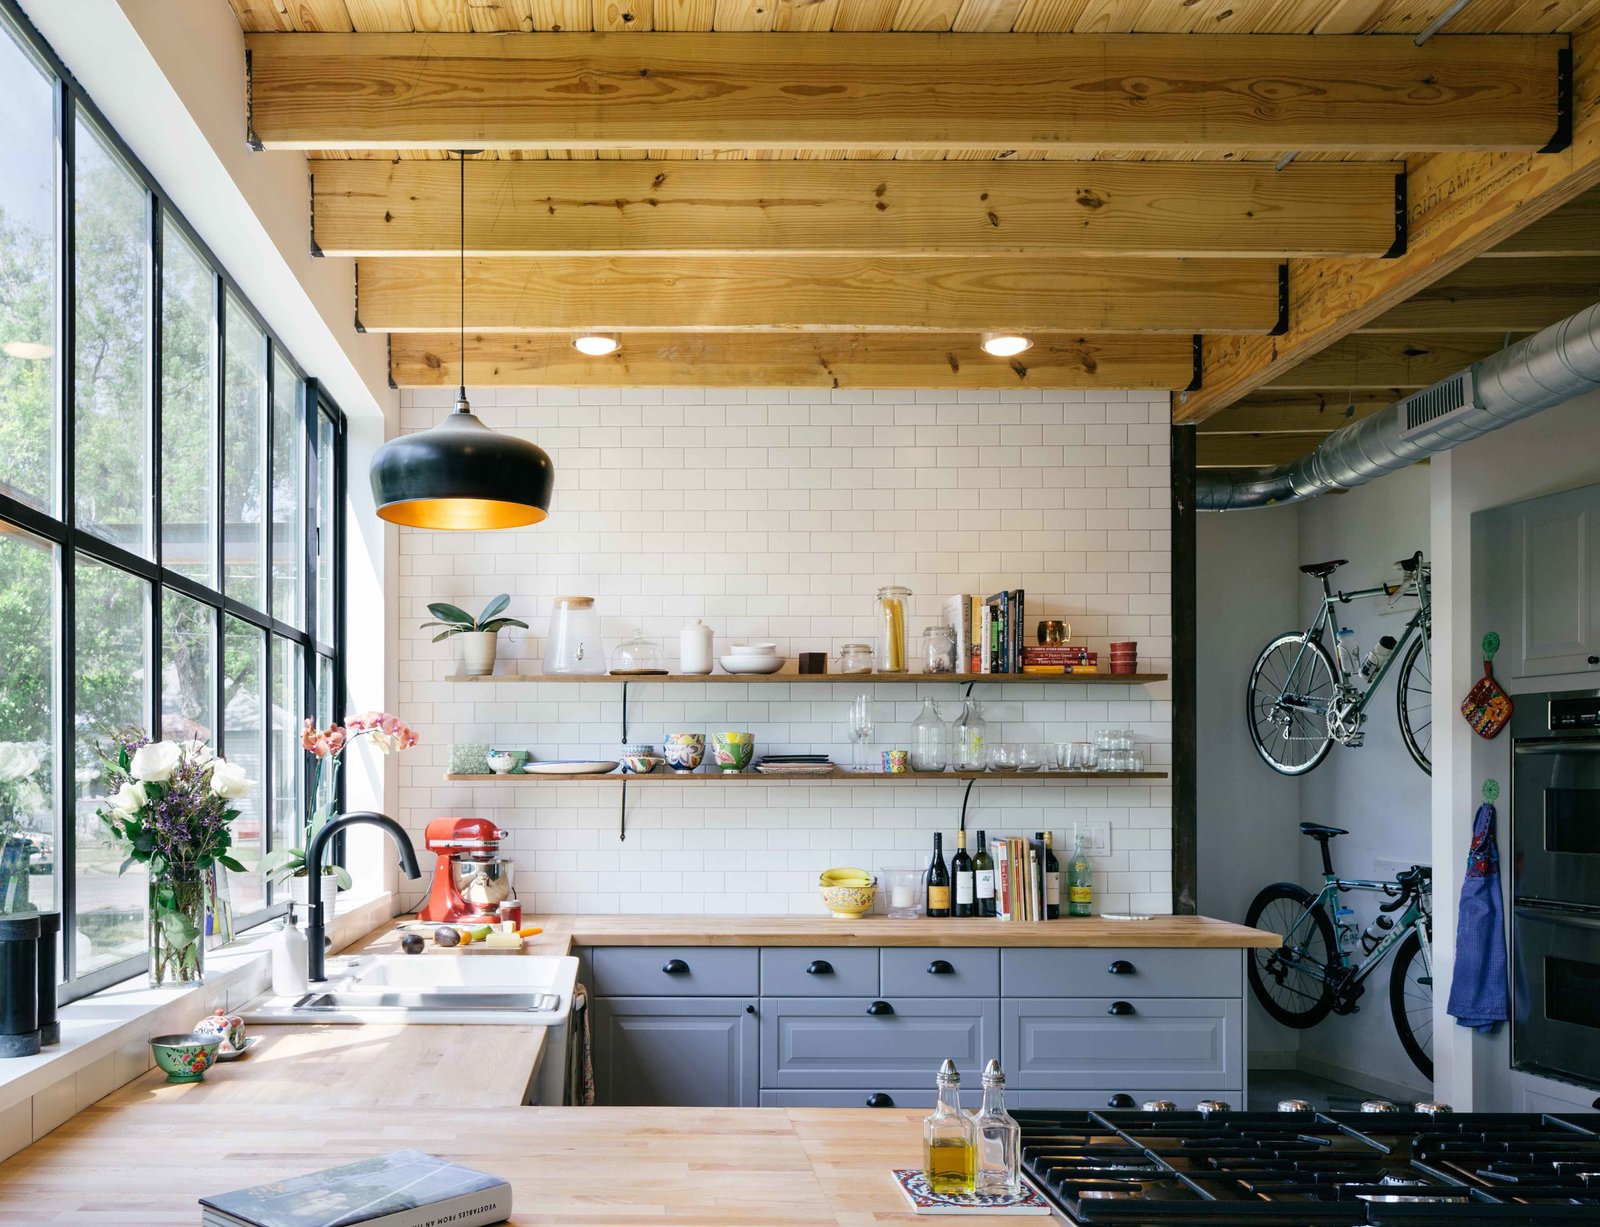 Shane Michael Pavonetti, an Austin-based architect and contractor, and his wife, Holly, built their eco-friendly home on a lean budget of $175,000. The cedar siding used on the exterior reappears throughout the house. Keen on recycling the wood, the couple added shelving to their kitchen as well. 